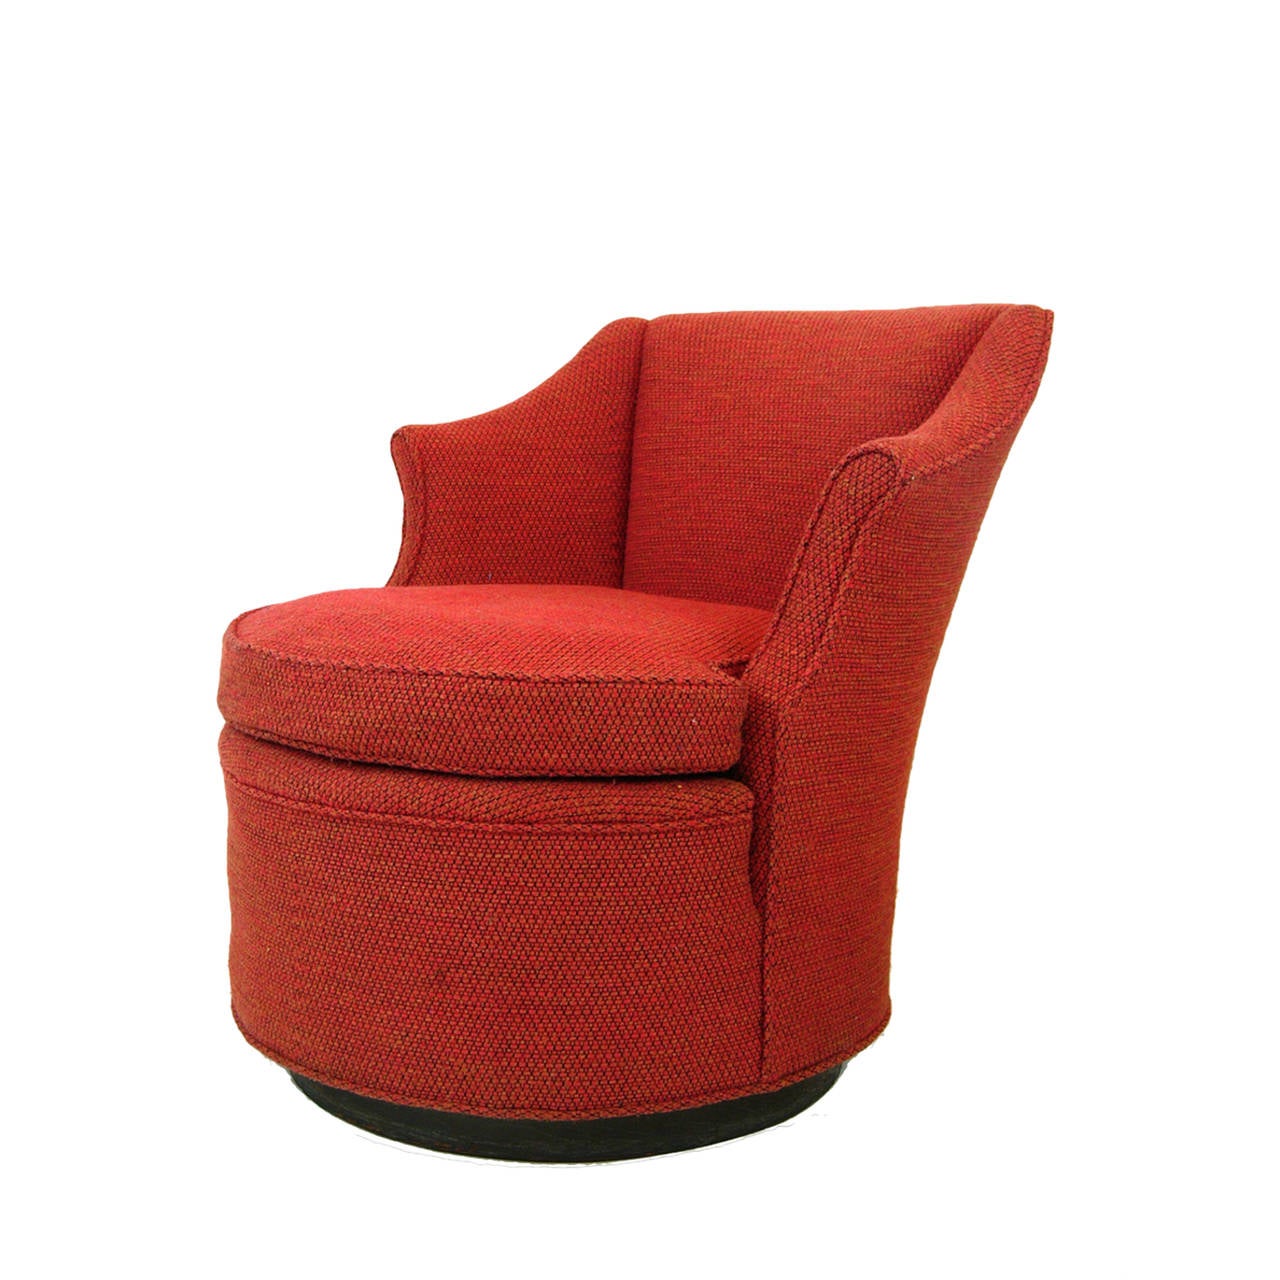 Mid-20th Century Pair of Red Swivel Chairs Attributed to Edward Wormley for Dunbar Furniture